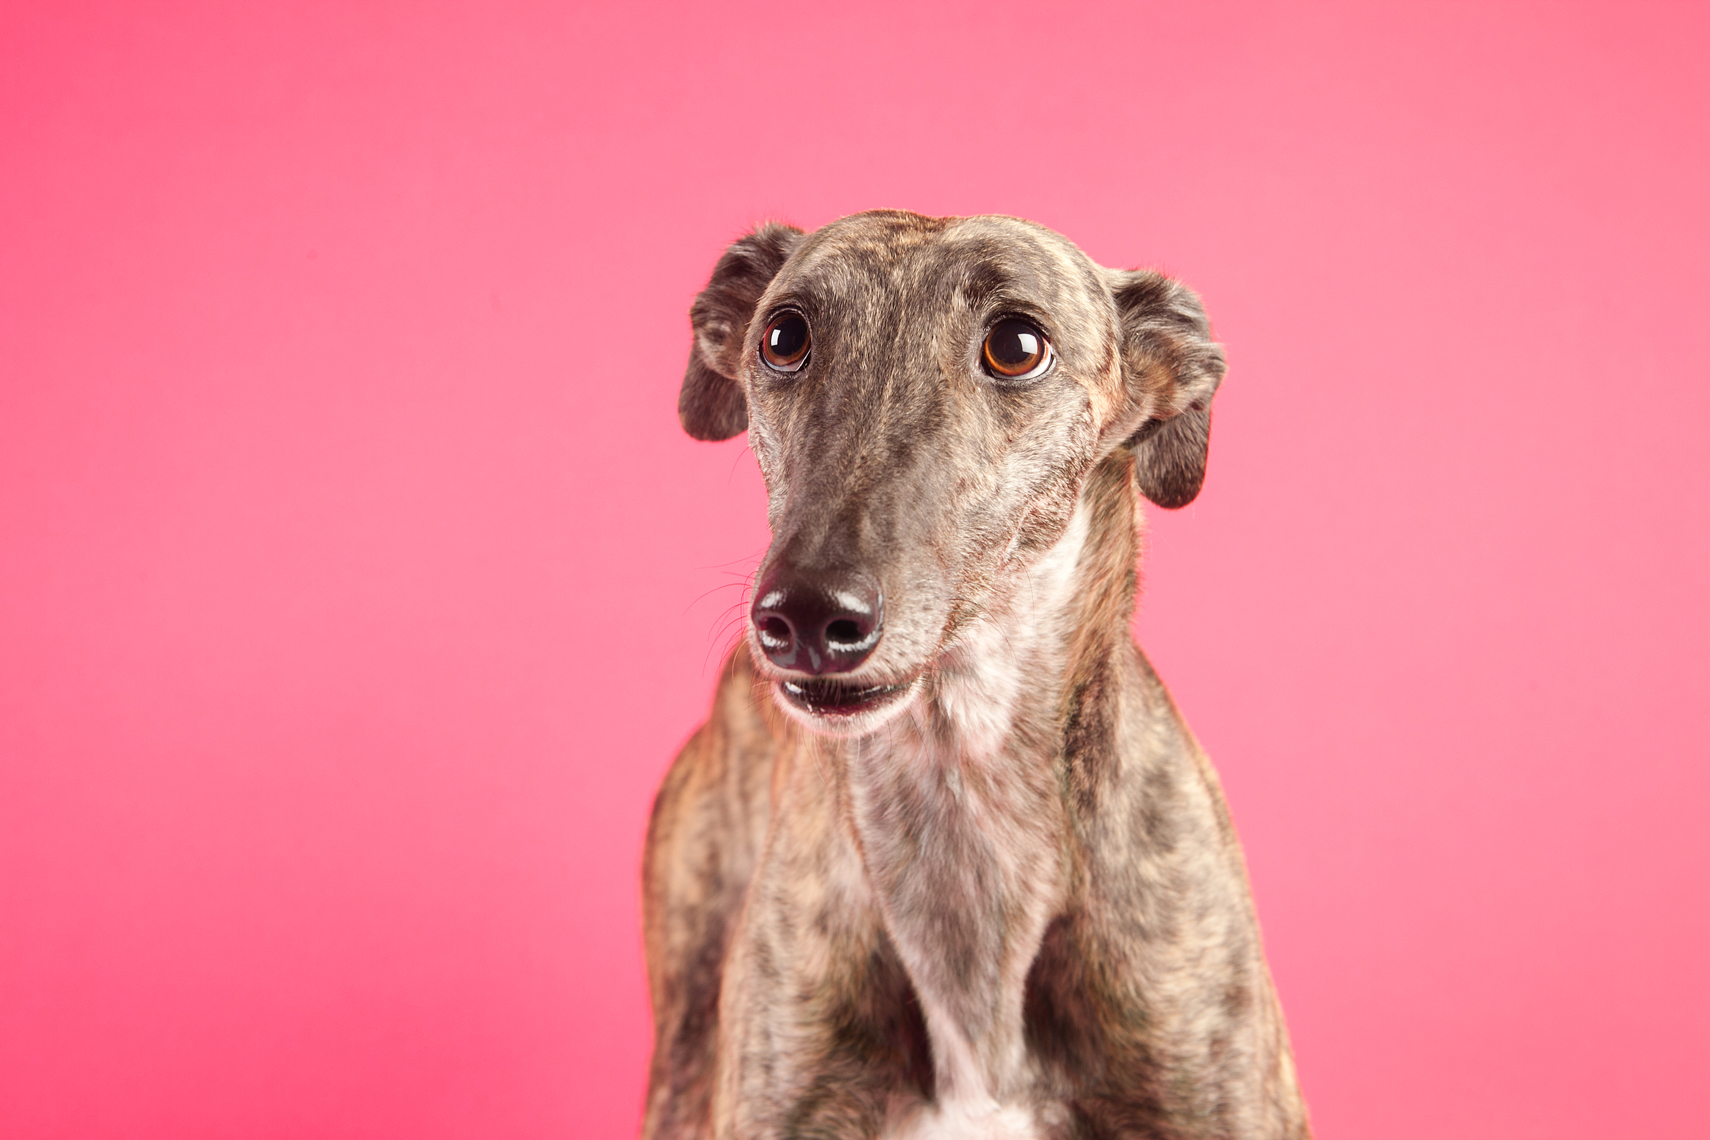 Girl rescued greyhound on a pink background